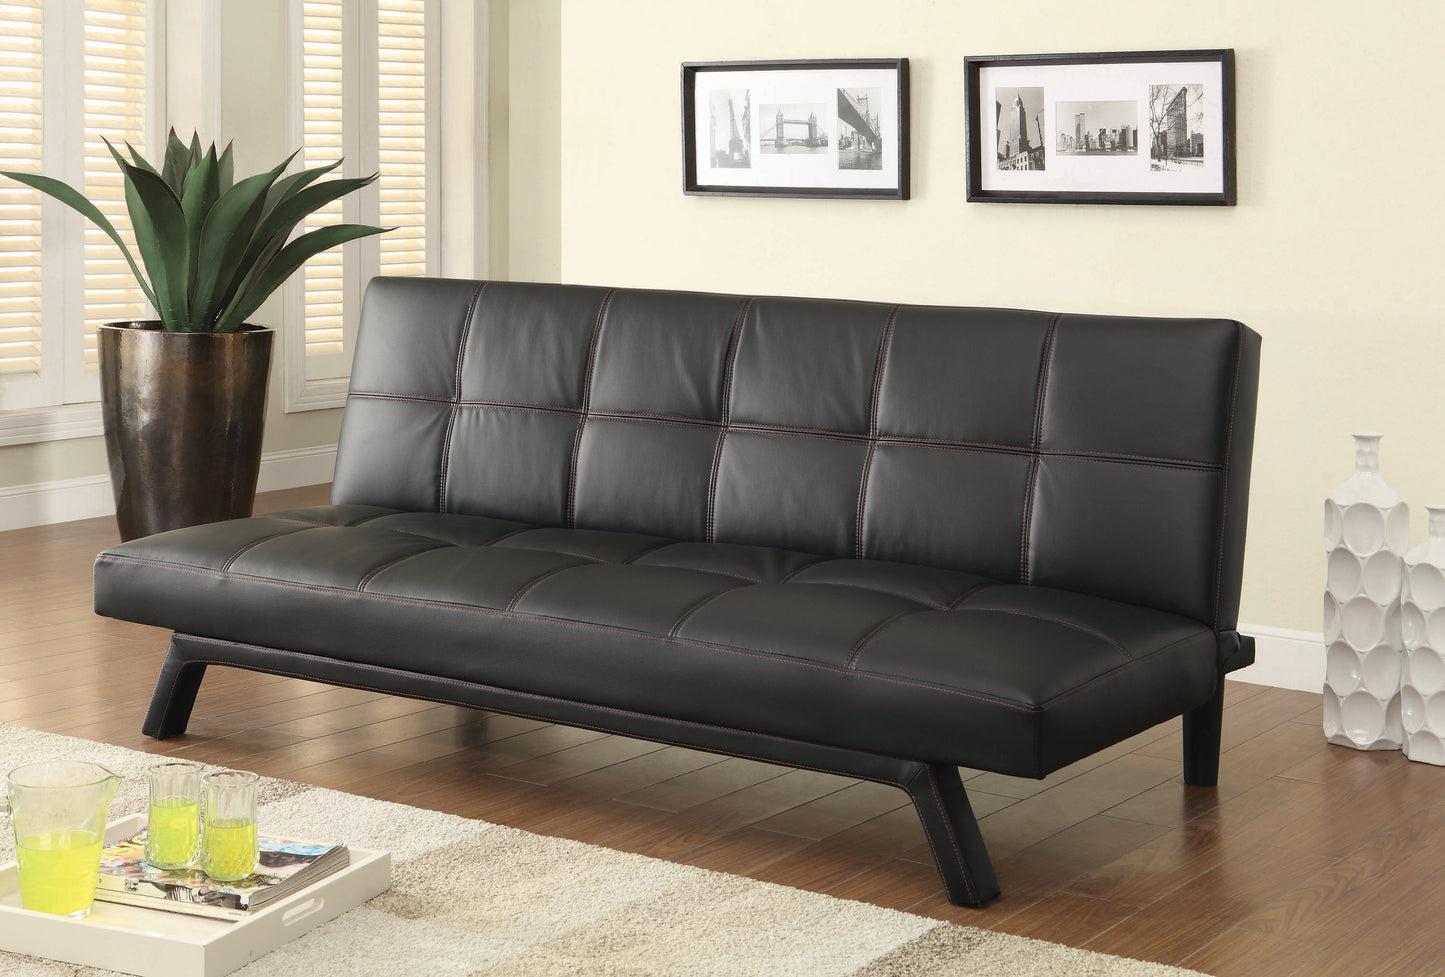 Corrie Biscuit-tufted Upholstered Sofa Bed Black